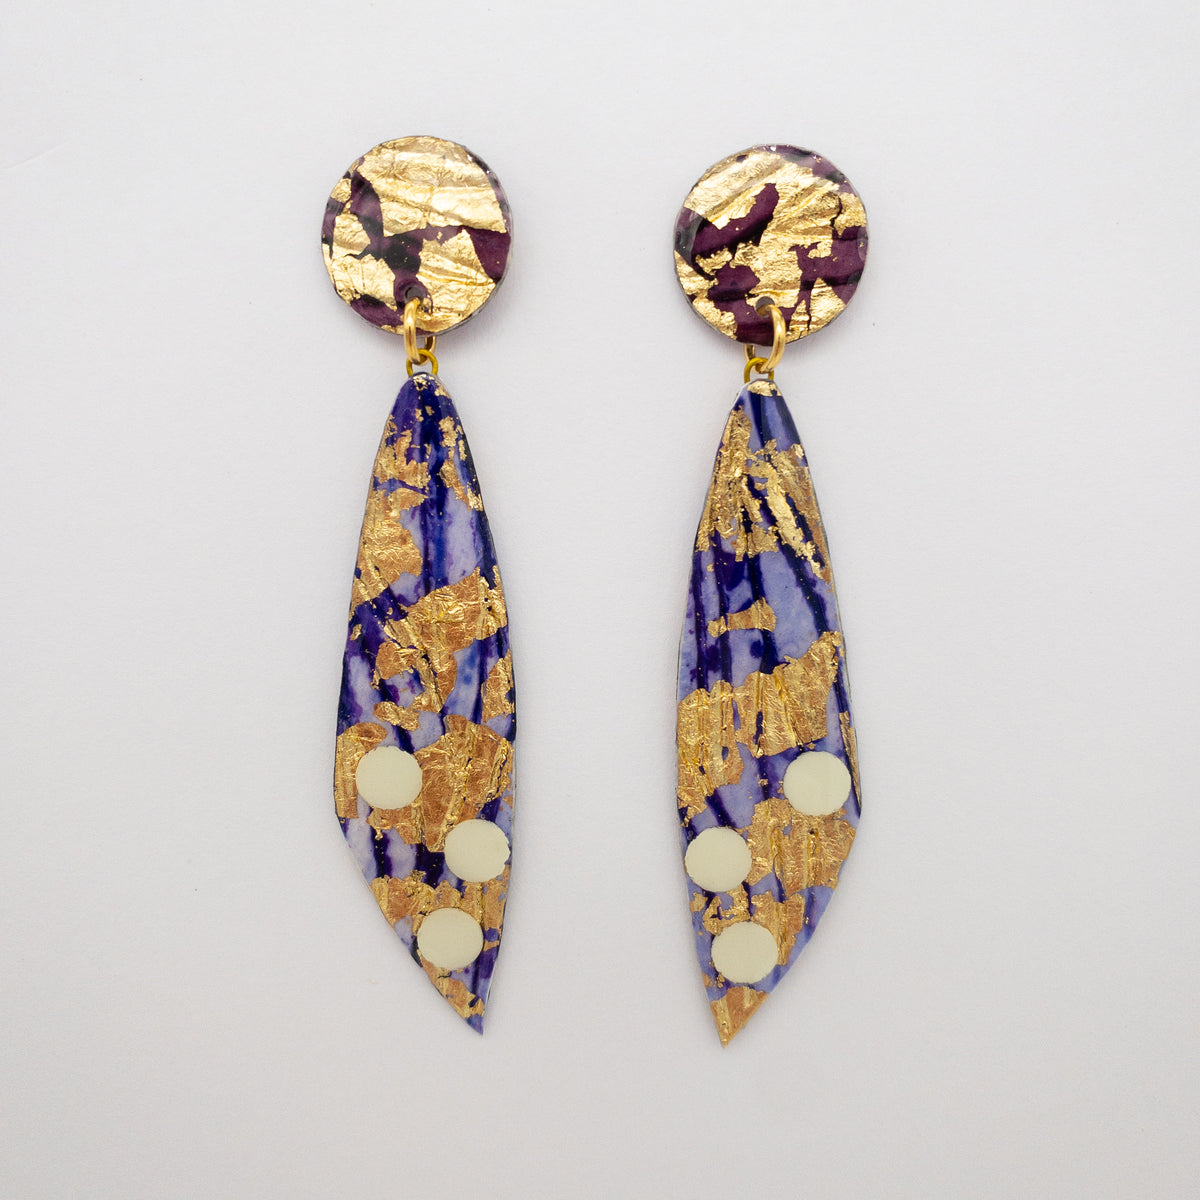 Moondrifter sgraffito textile earrings in gold/lilac/aubergine